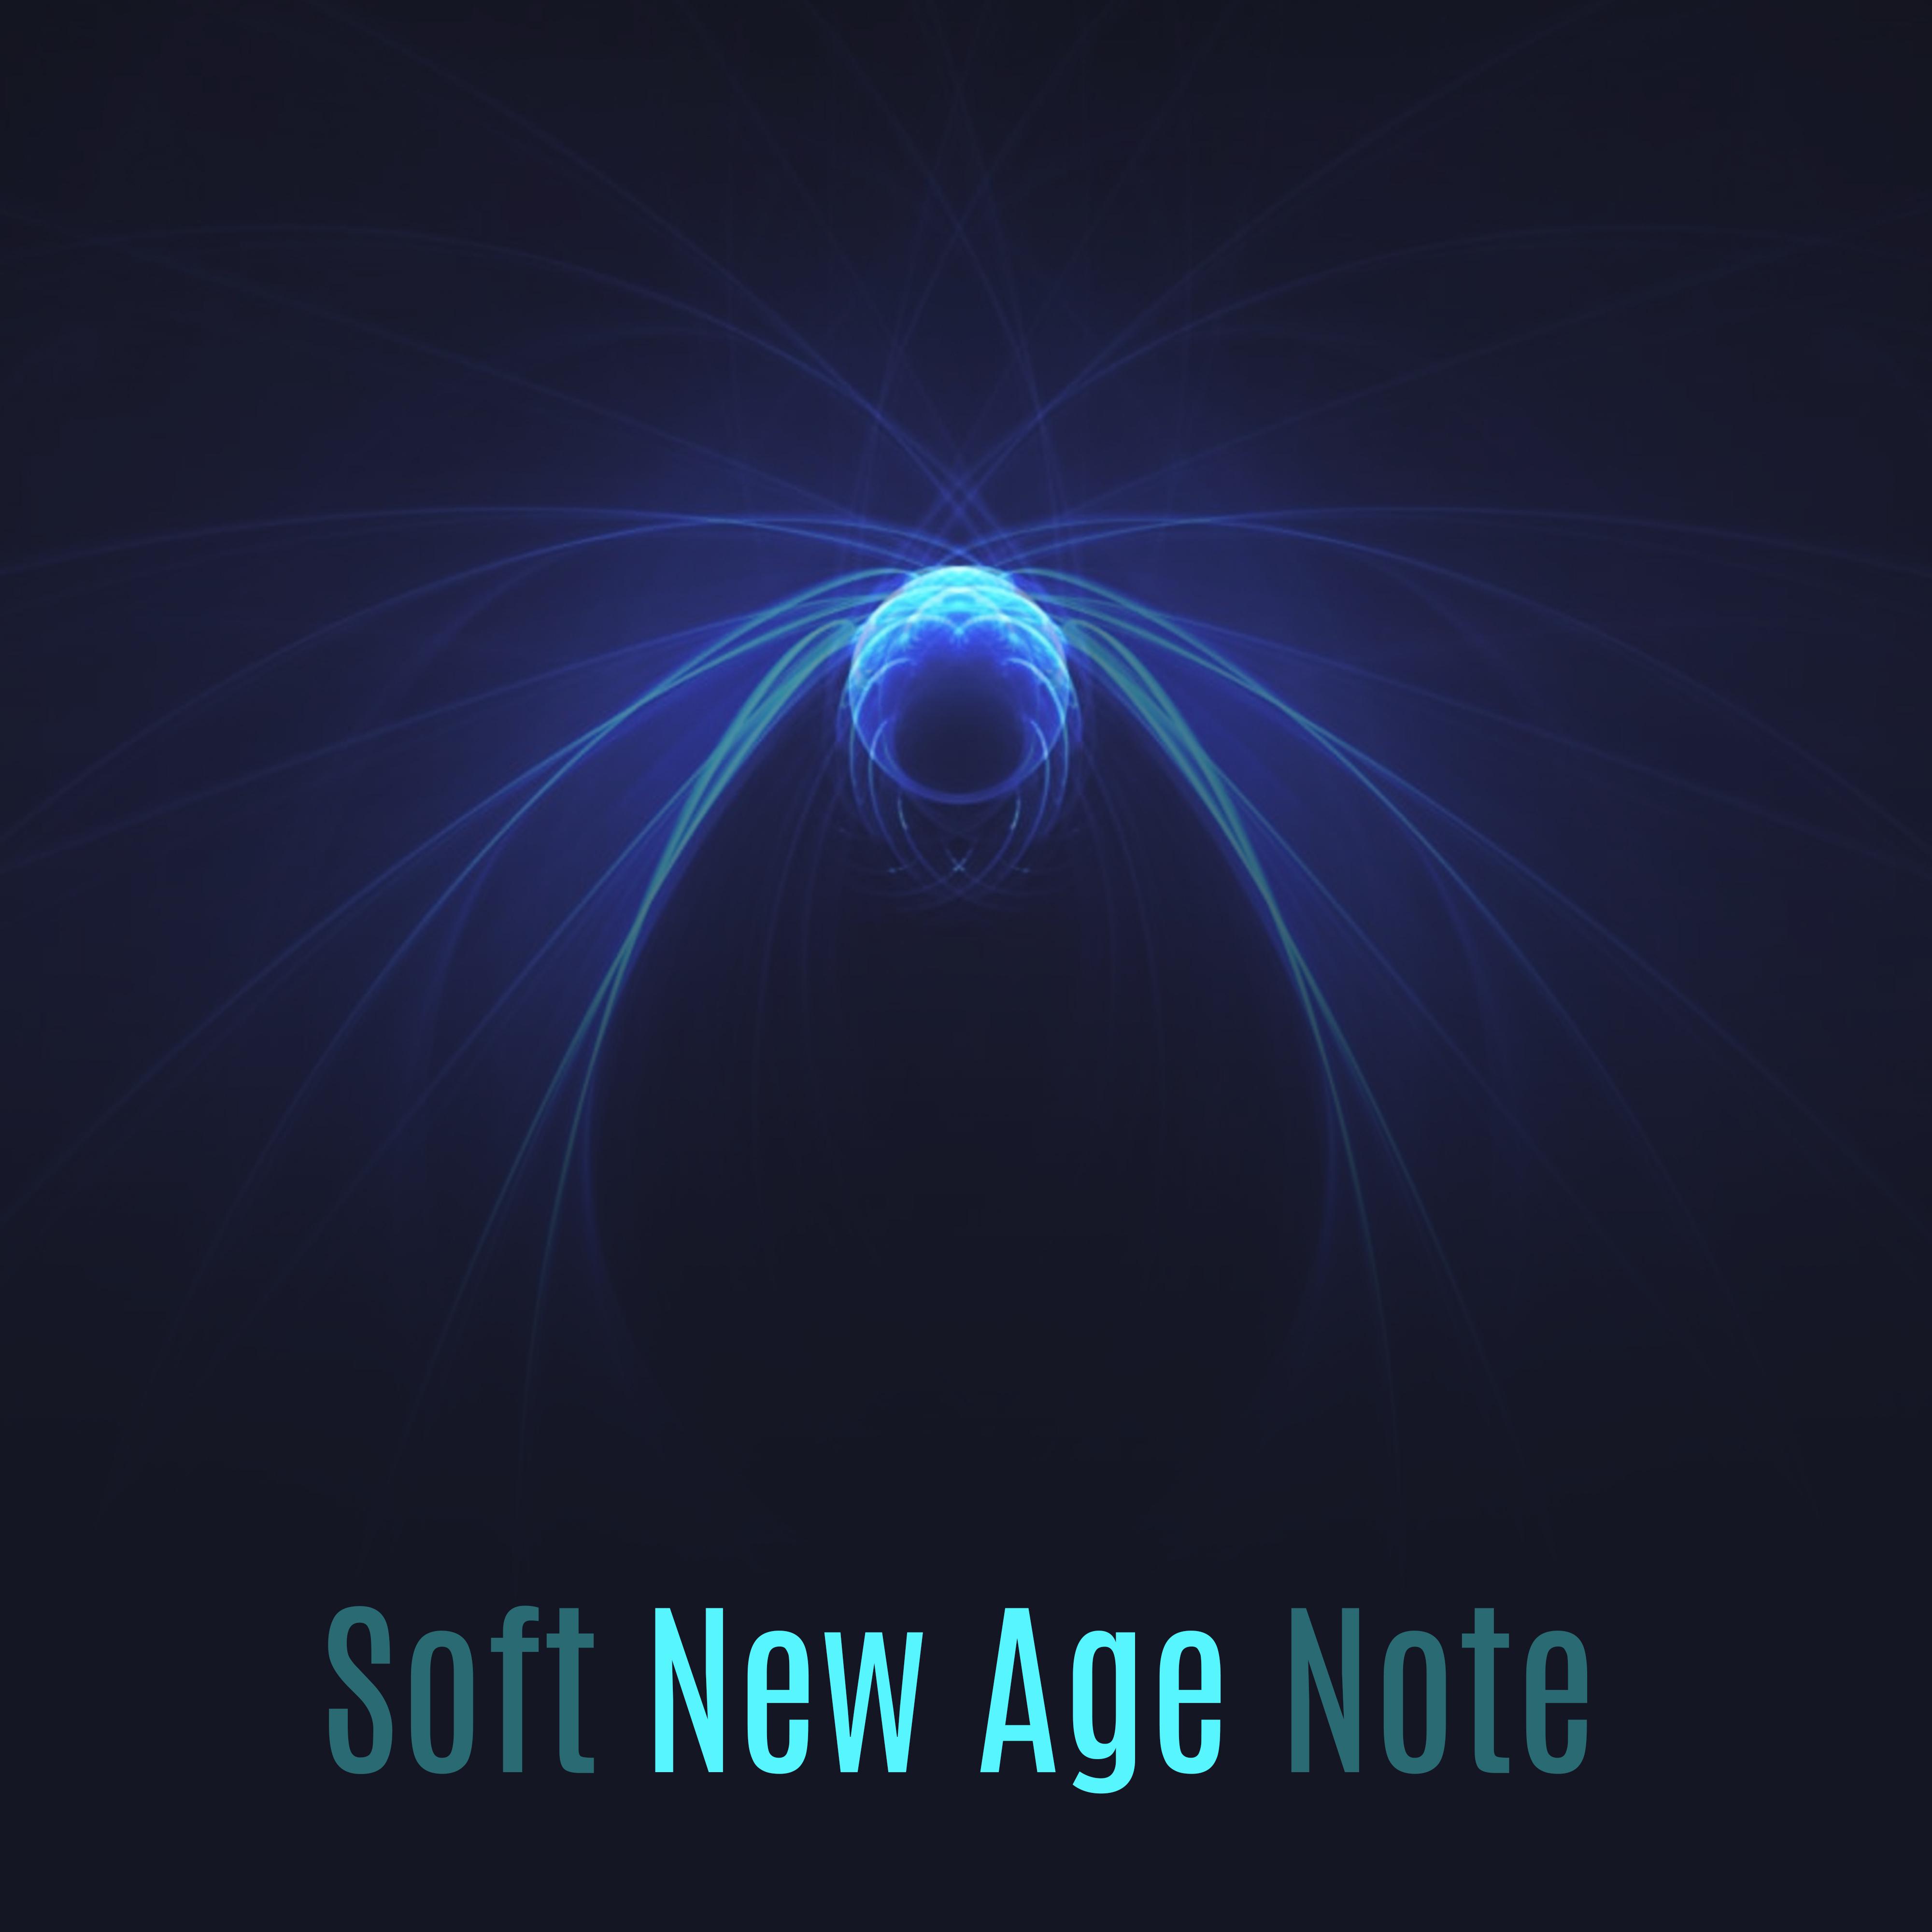 Soft New Age Note